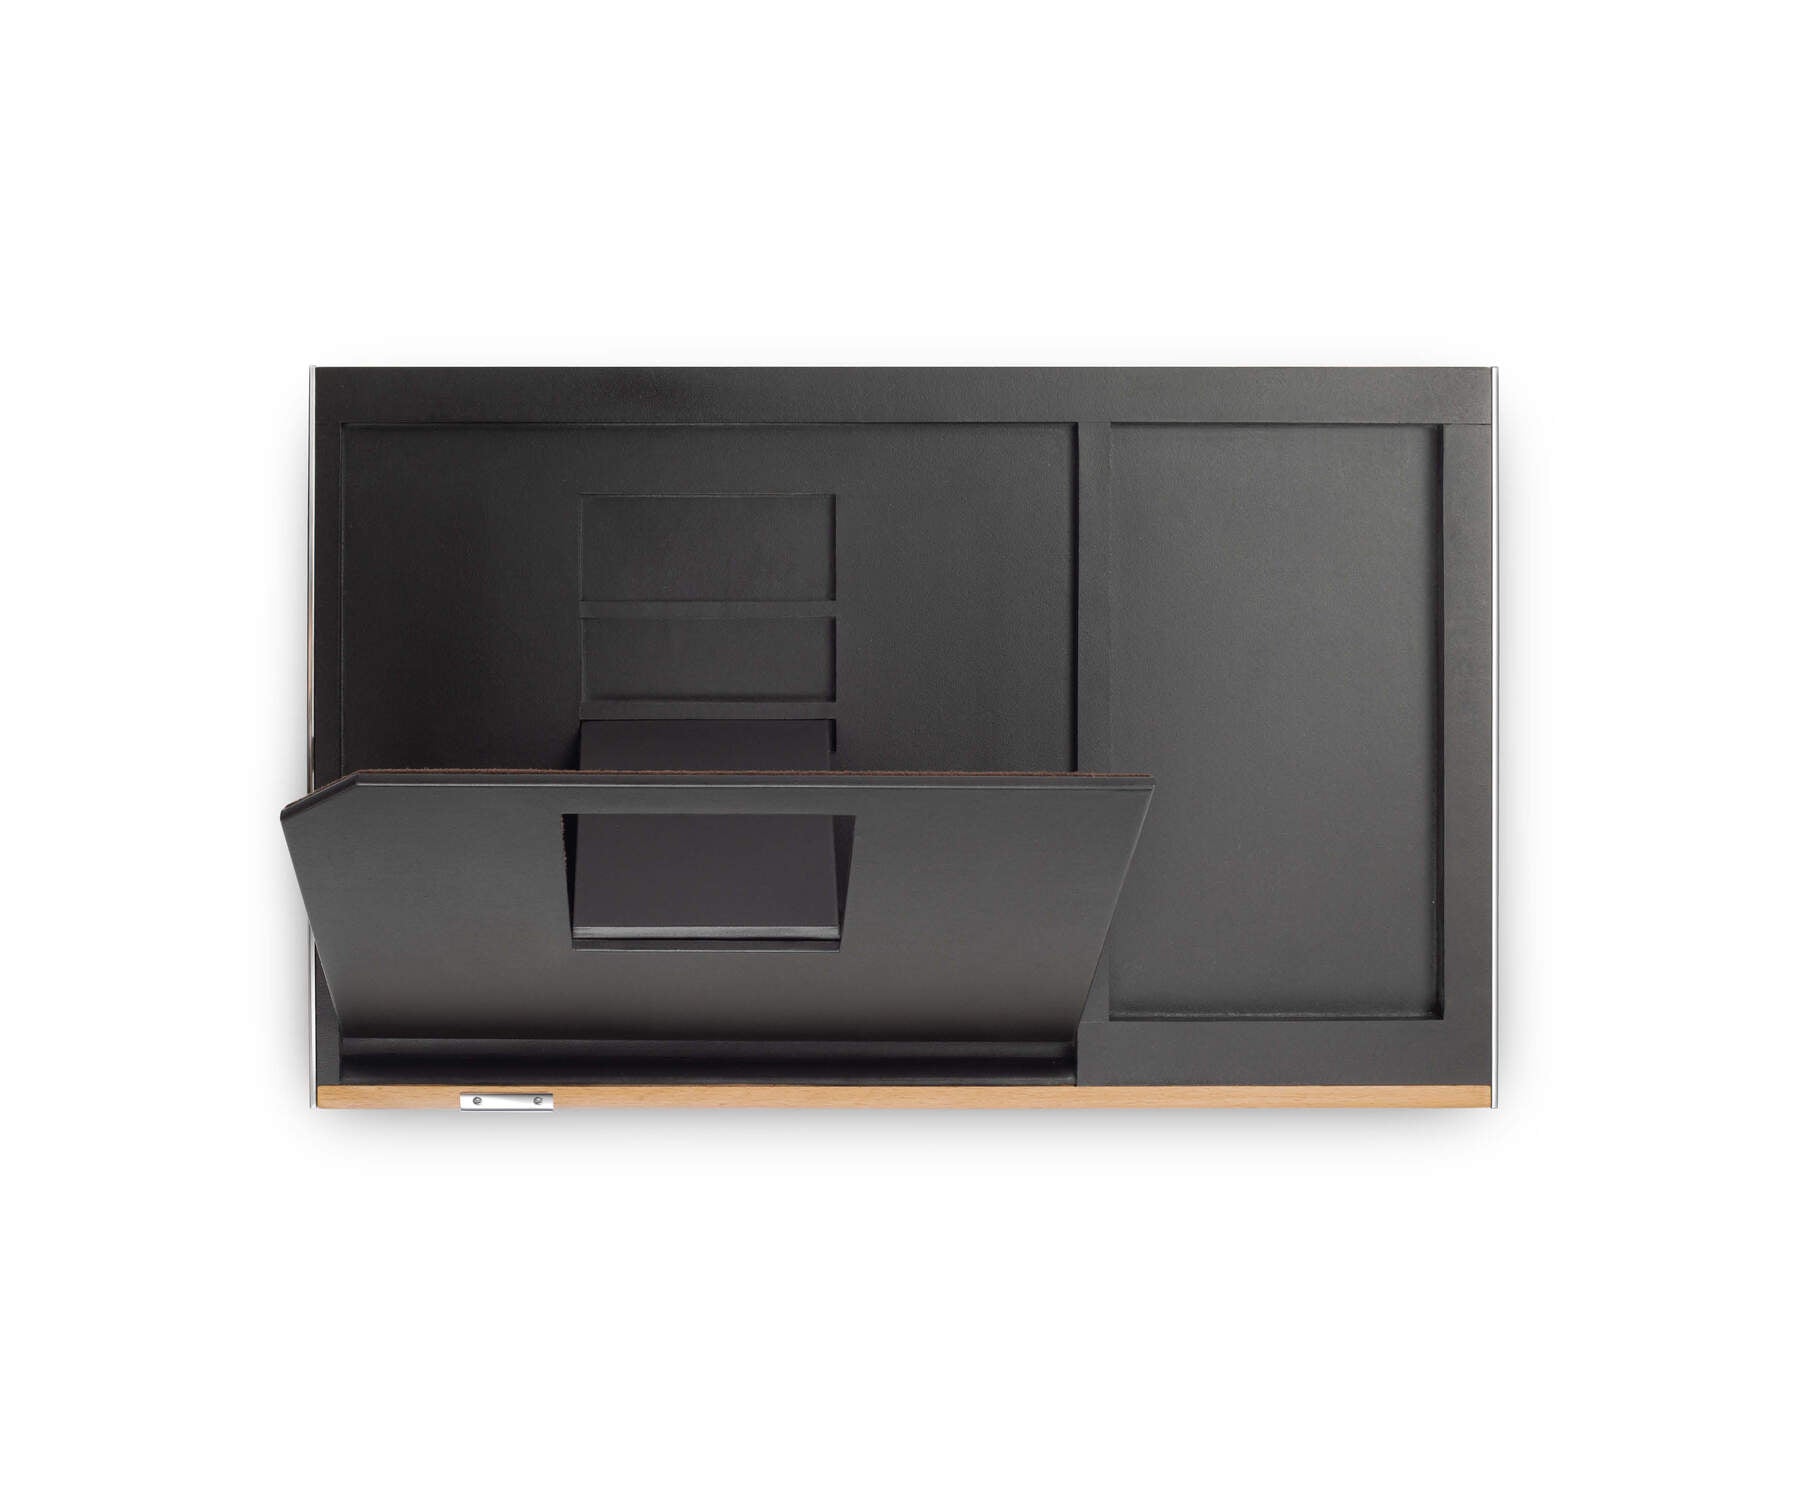 Buy Dark Brown Manhattan Ipad Stand - Compartment for Stationary items - Taamaa